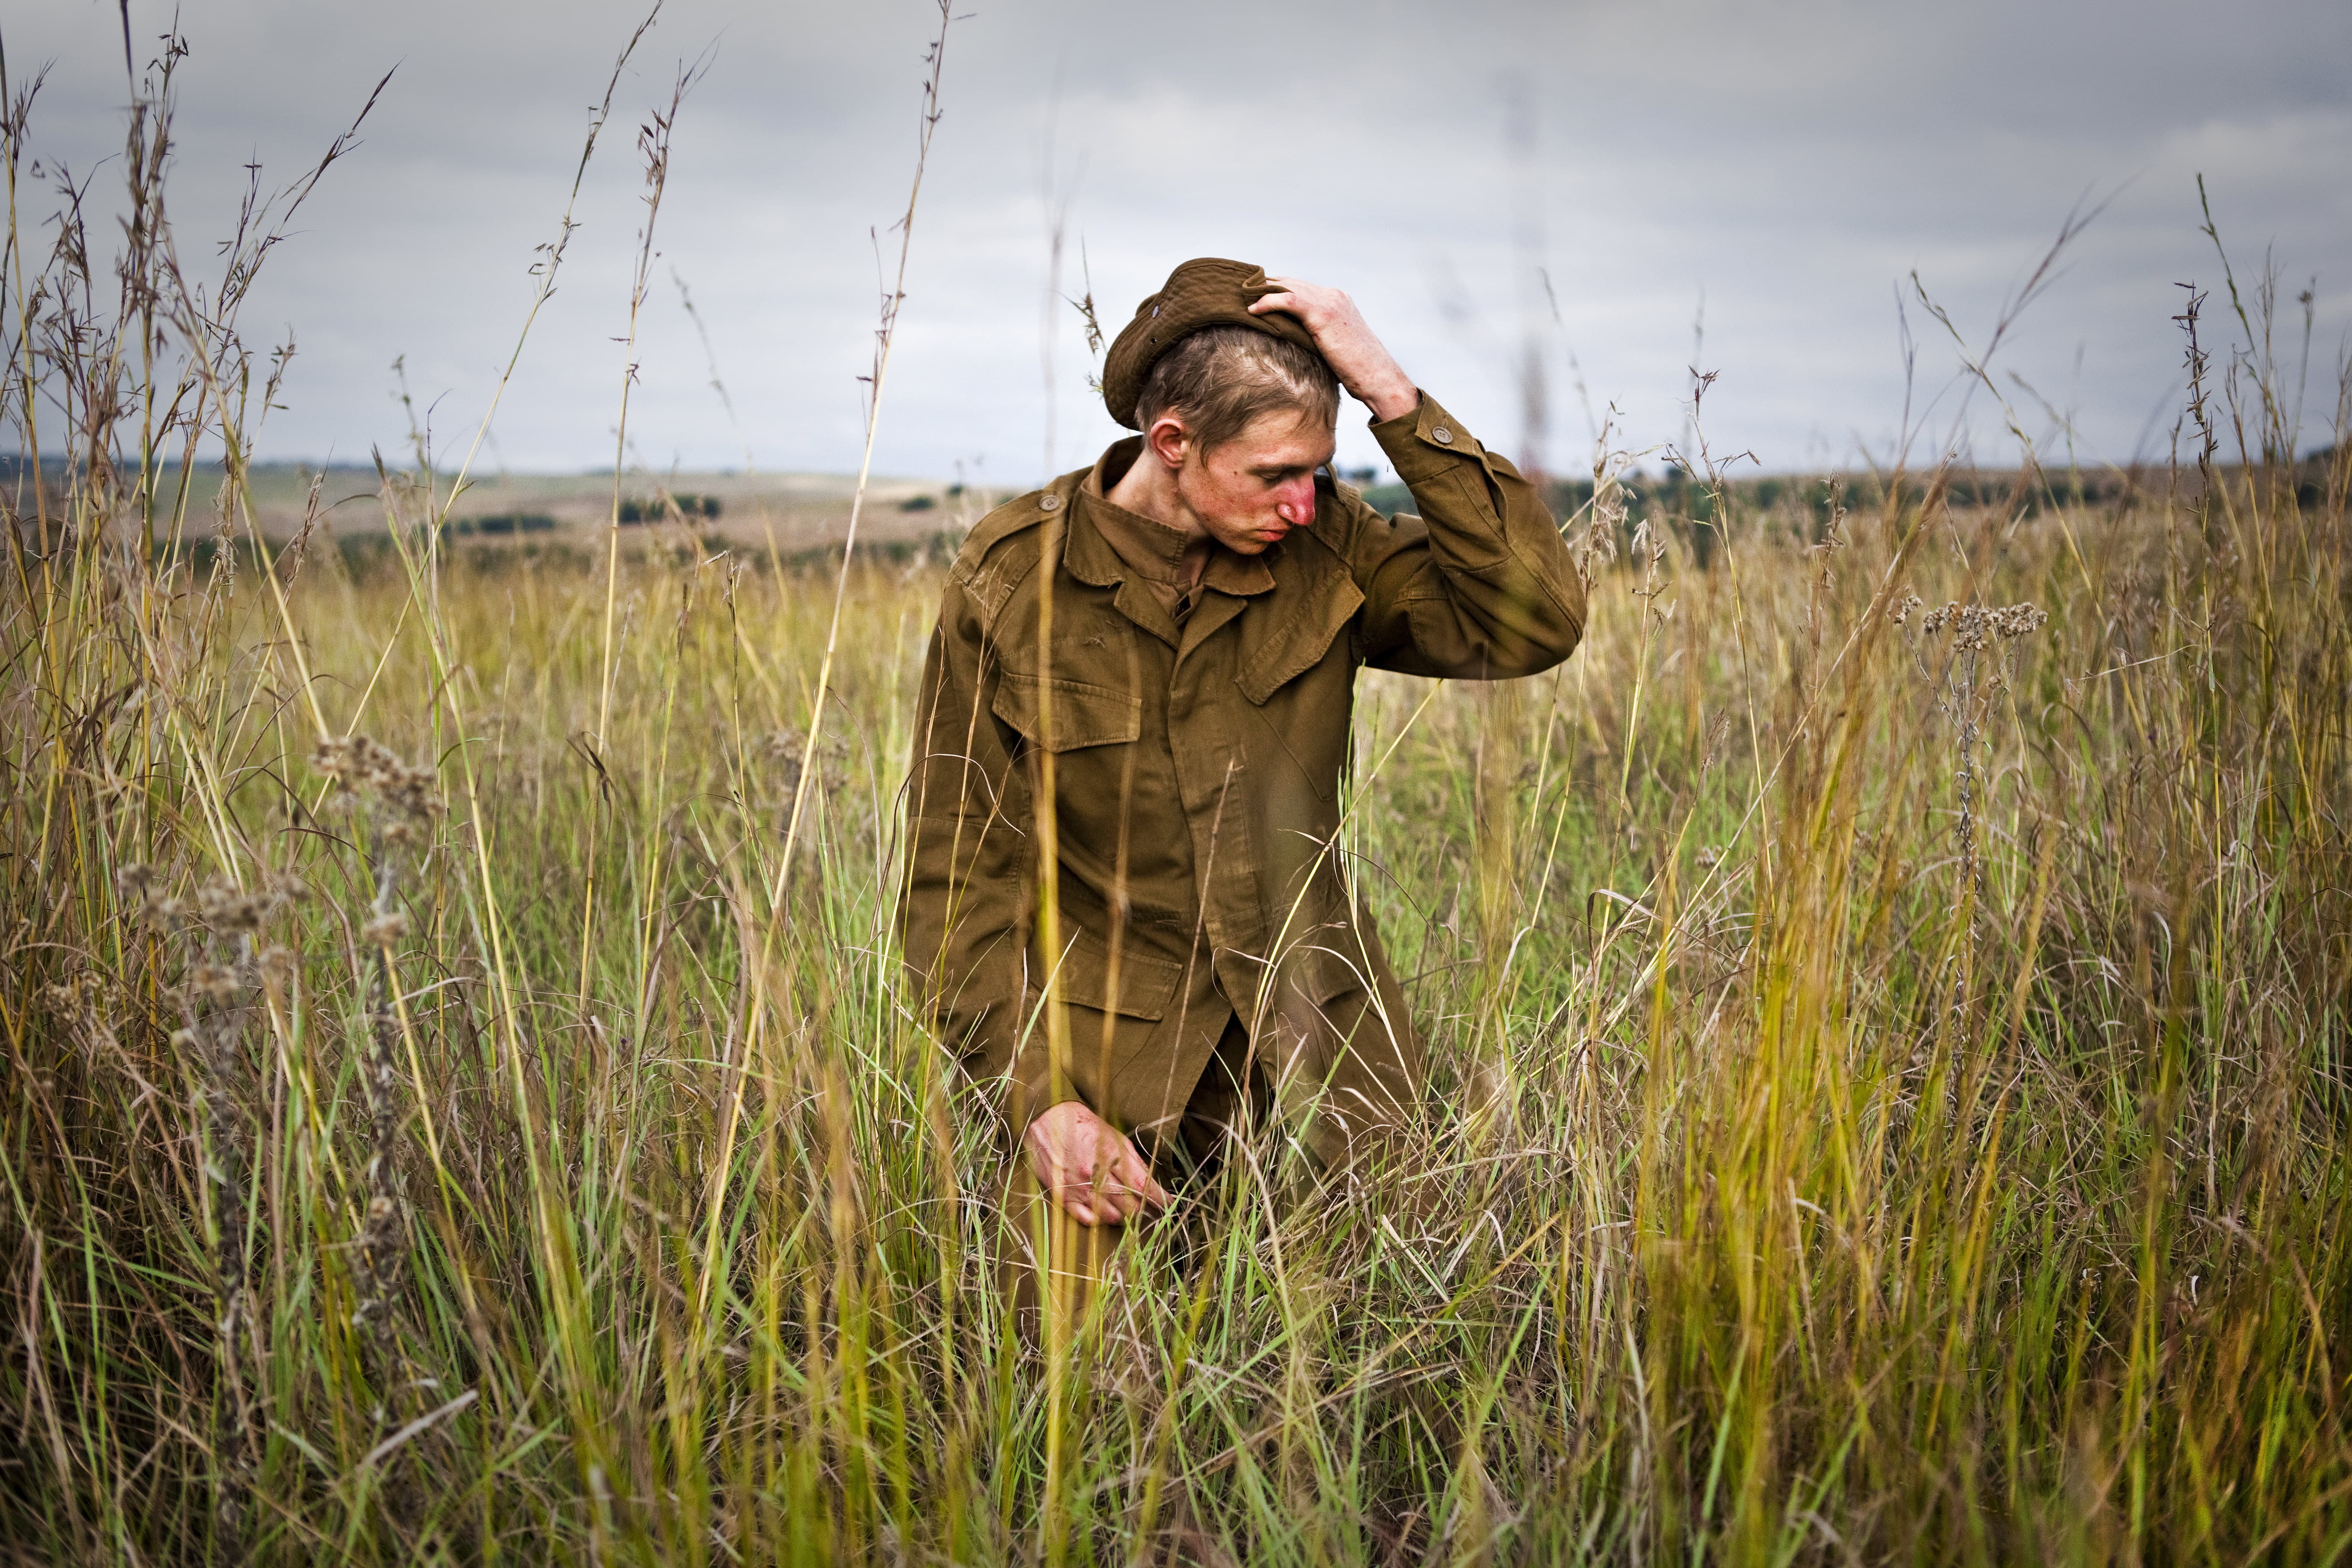 A young blonde boy in military uniform stands in a field of long grass, adjusting his hat.